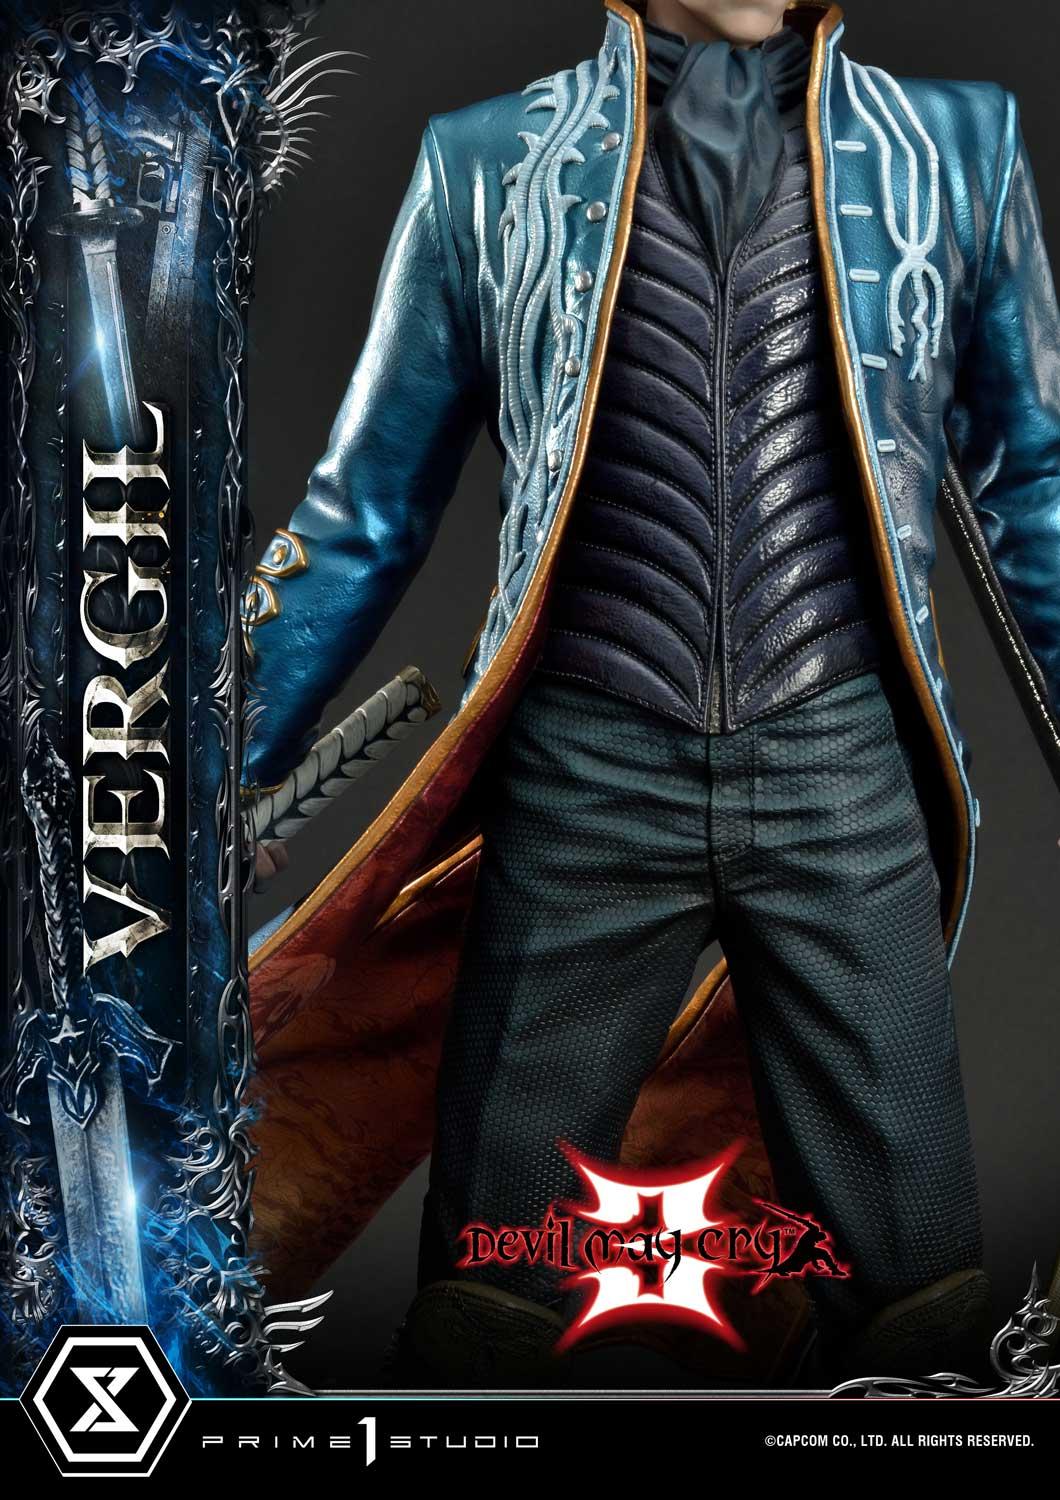 Video Game Devil May Cry 5 Vergil Vest - Jackets Masters